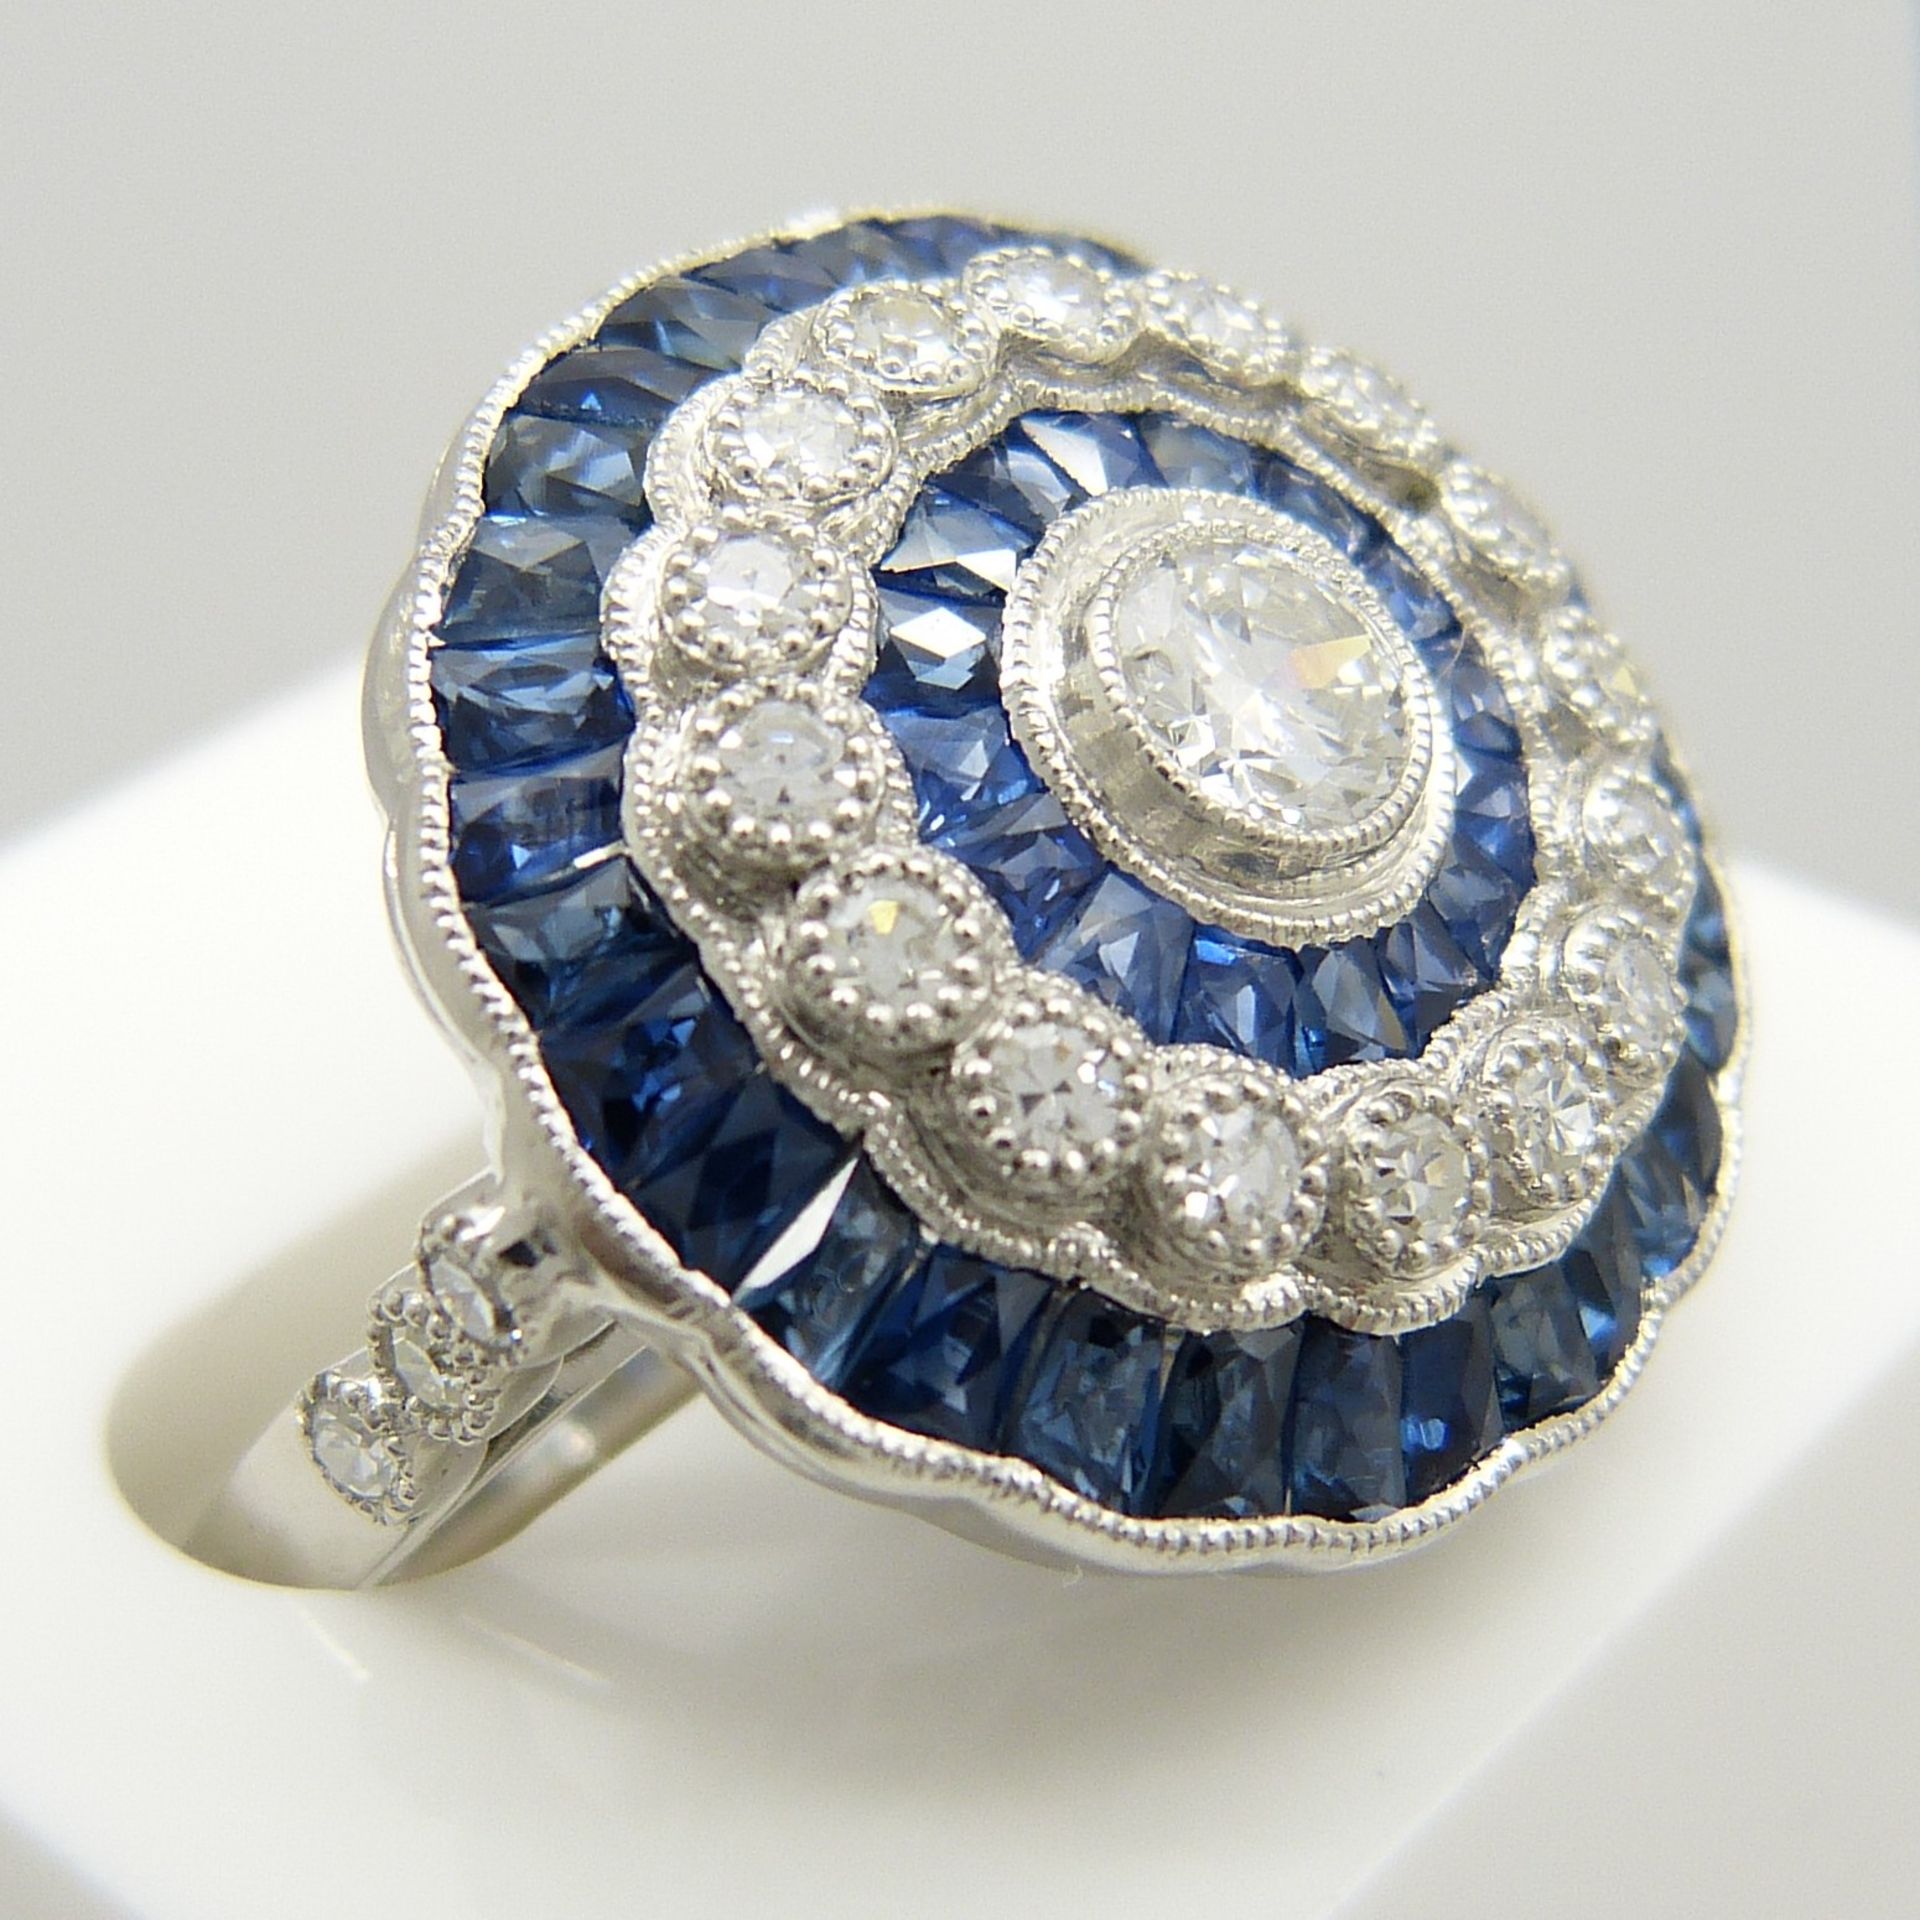 A large platinum floral-style diamond and sapphire cocktail ring - Image 4 of 7